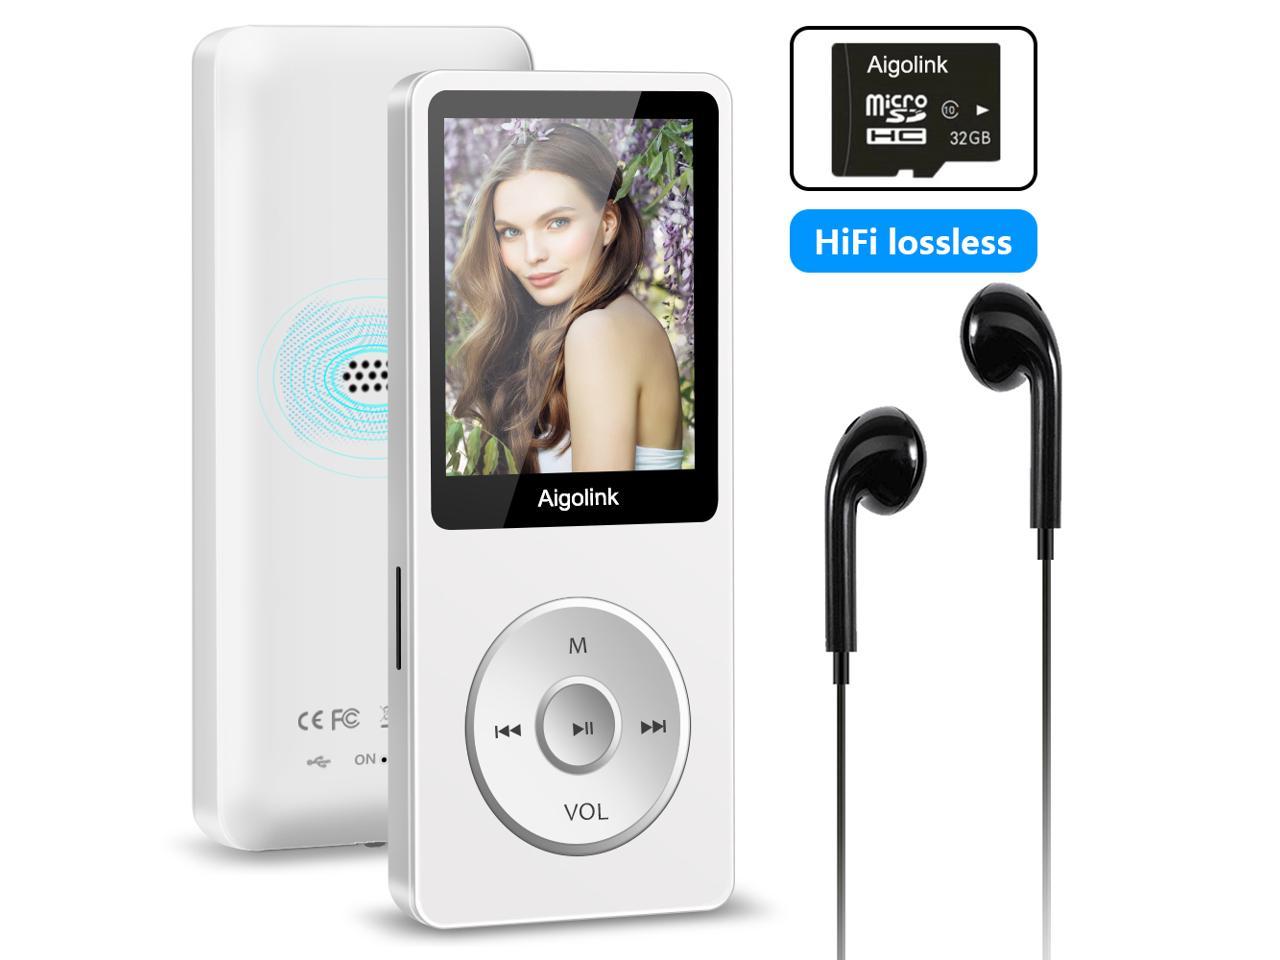 Include Earphones Aigital Music Player MP3 Built-in 8GB Memory 1.8 HD Screen HiFi Lossless Sound MP3 Video Player with FM Radio/E-Book/Game Support Up to 128GB Black 